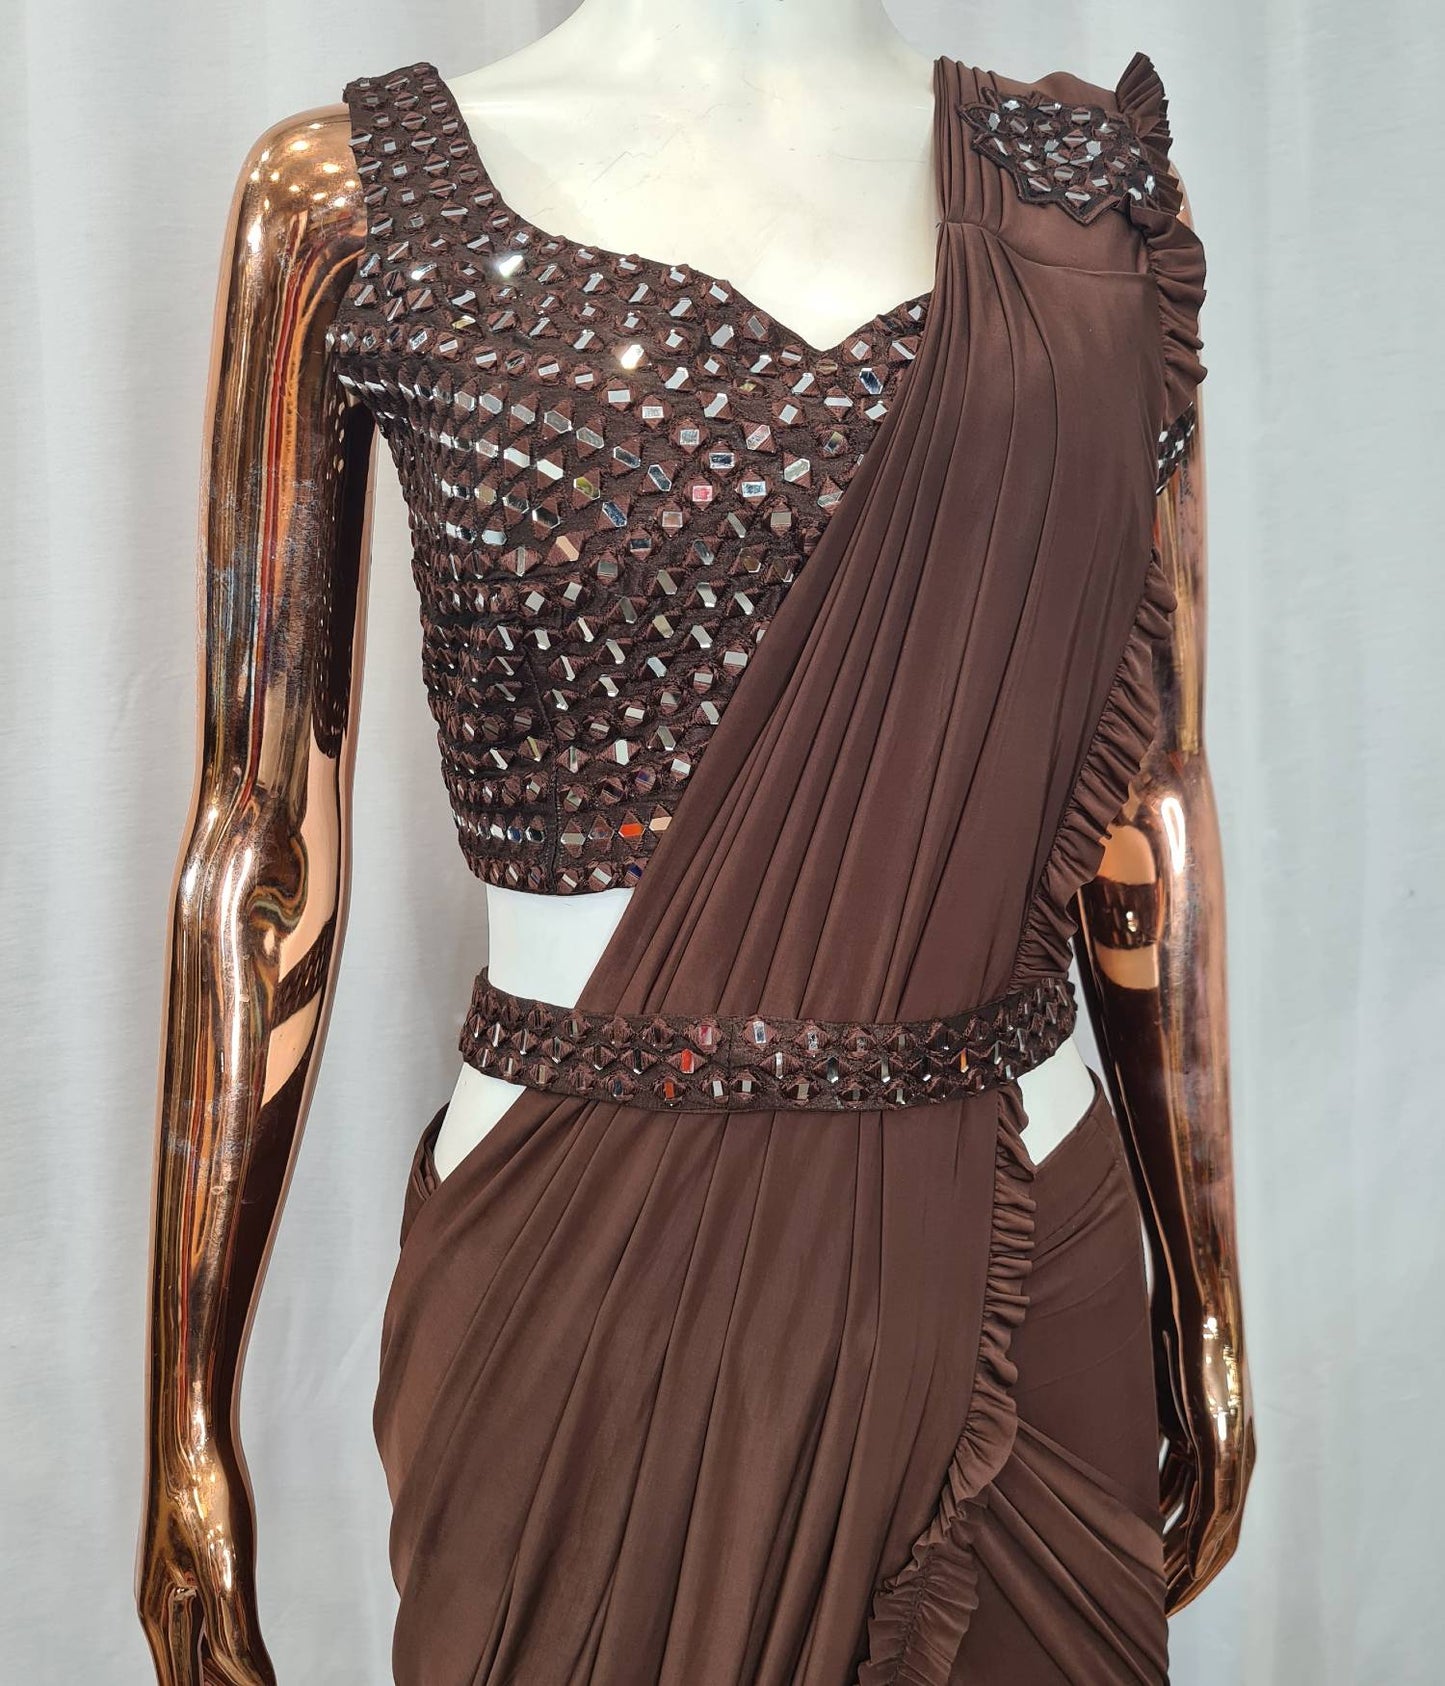 Designer Drape Saree In Brown-spendworthclothing-Color_Chocolate Brown,Drape-Dresses,Easy-Returns,Free-Shipping,FUSION-WEAR,Item Type_Drape Dresses,Material_Imported Lycra,Size_Large,Size_Medium,Size_Small,Speedy-Deliveries